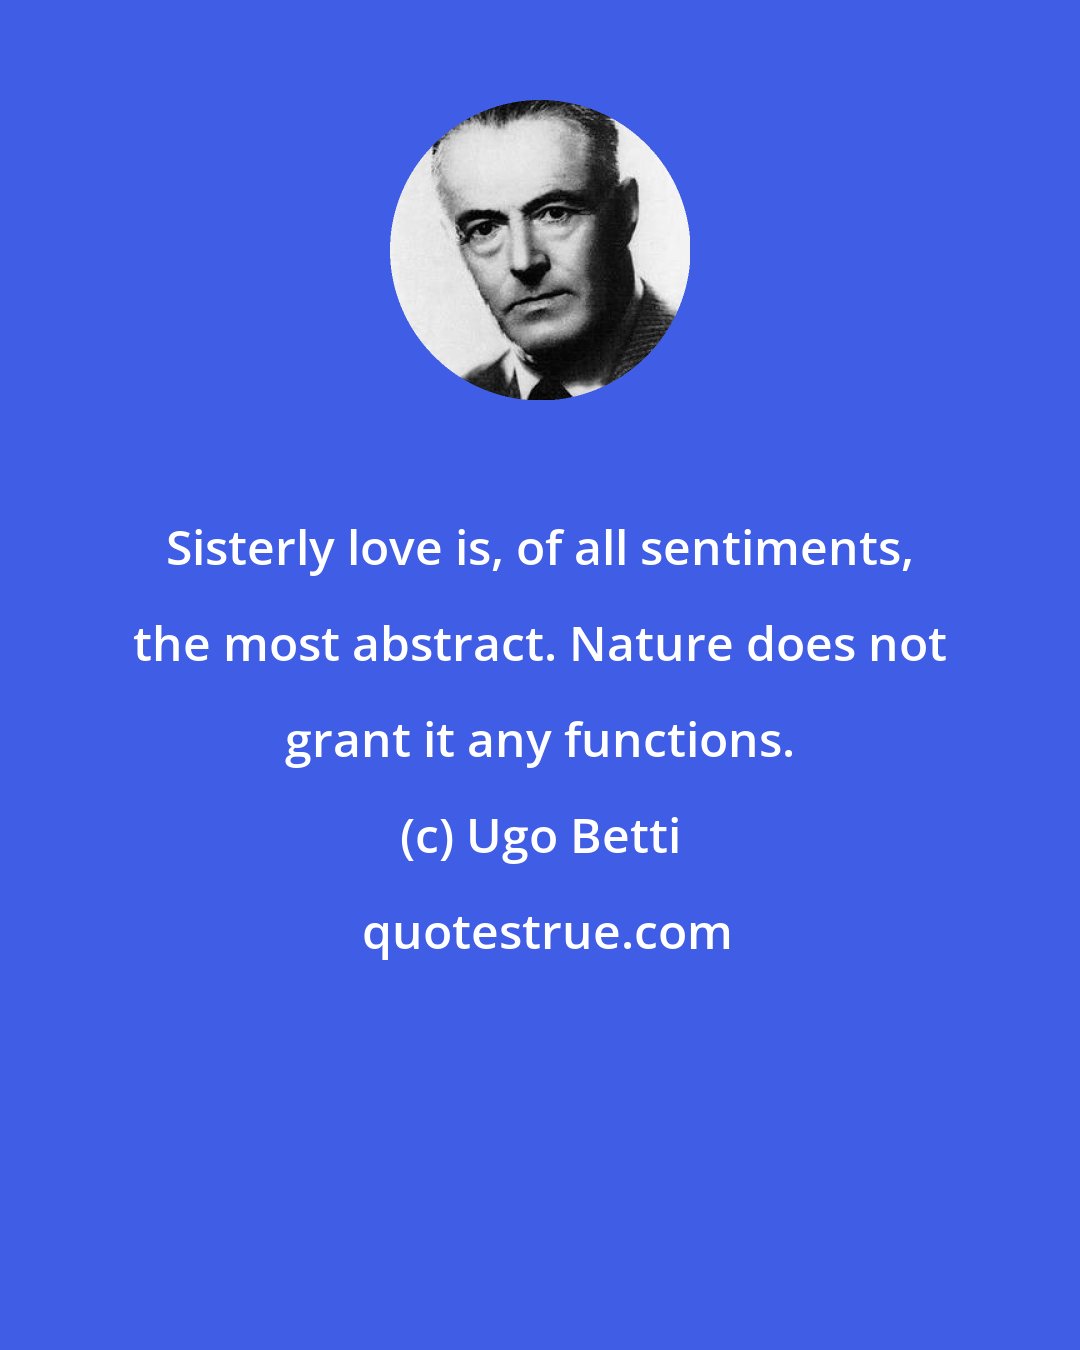 Ugo Betti: Sisterly love is, of all sentiments, the most abstract. Nature does not grant it any functions.